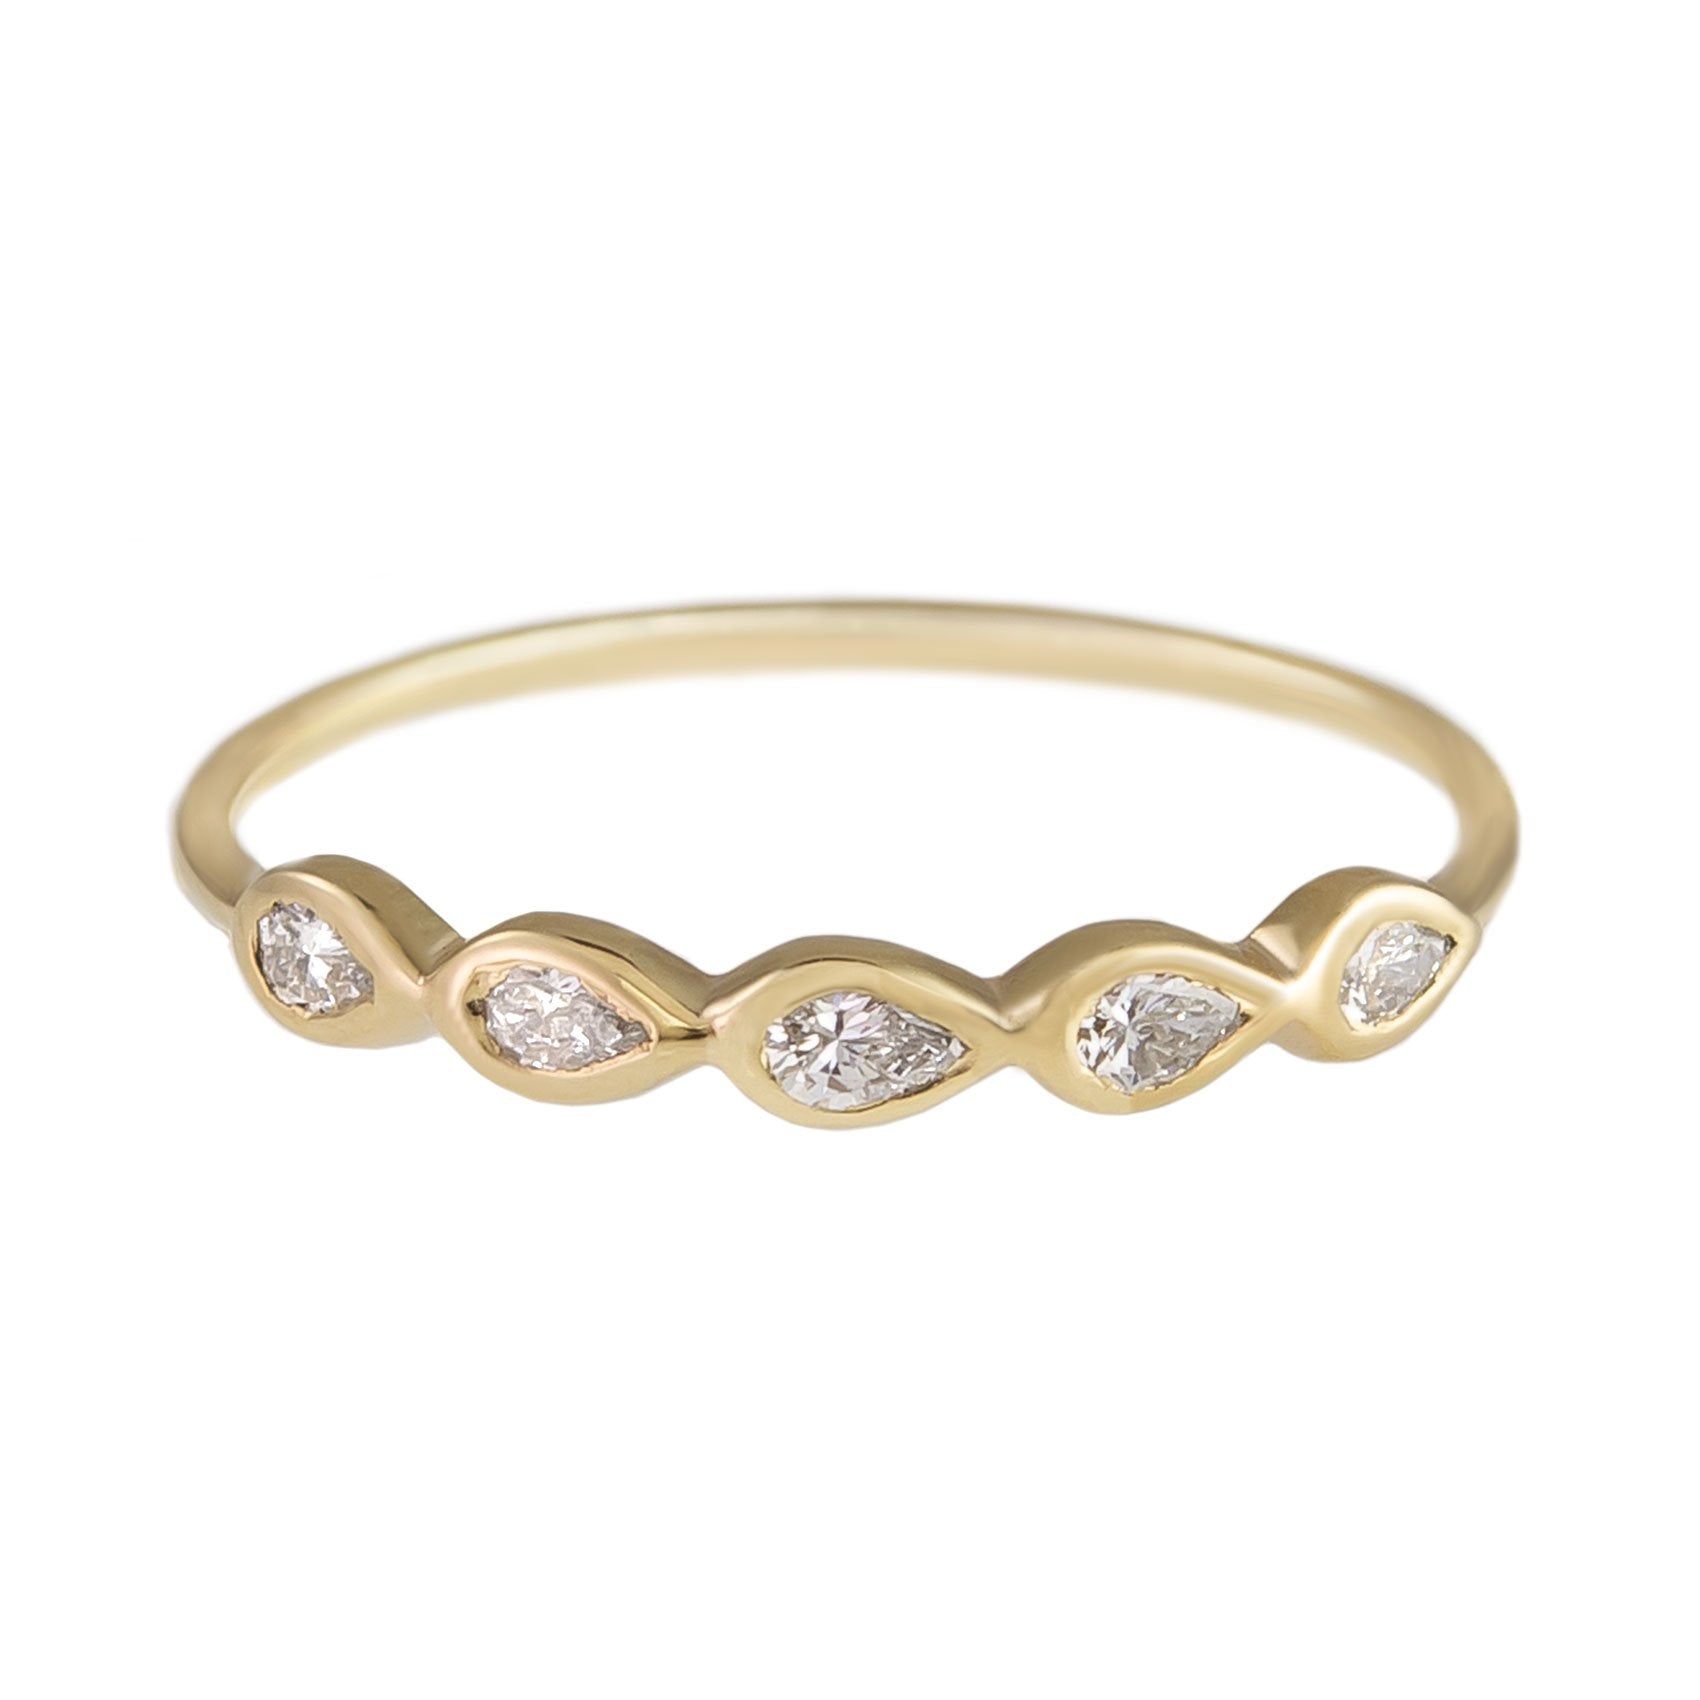 Metier by tomfoolery 5 Stone White Diamond Ring in 9ct Yellow Gold with Pear Diamonds